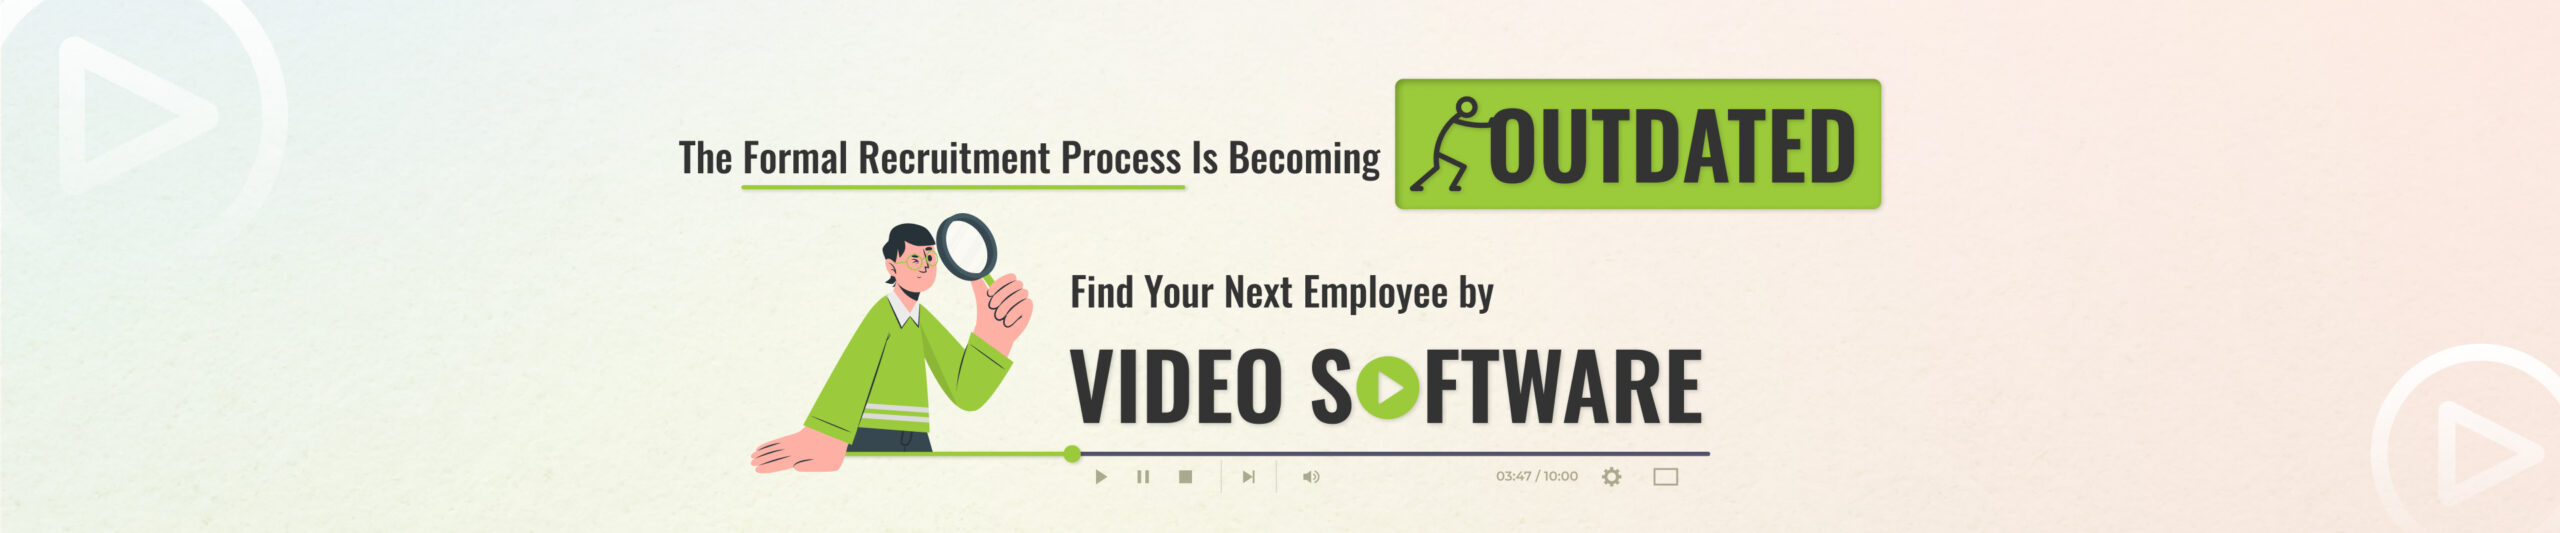 Find Your Next Employee by Video Software